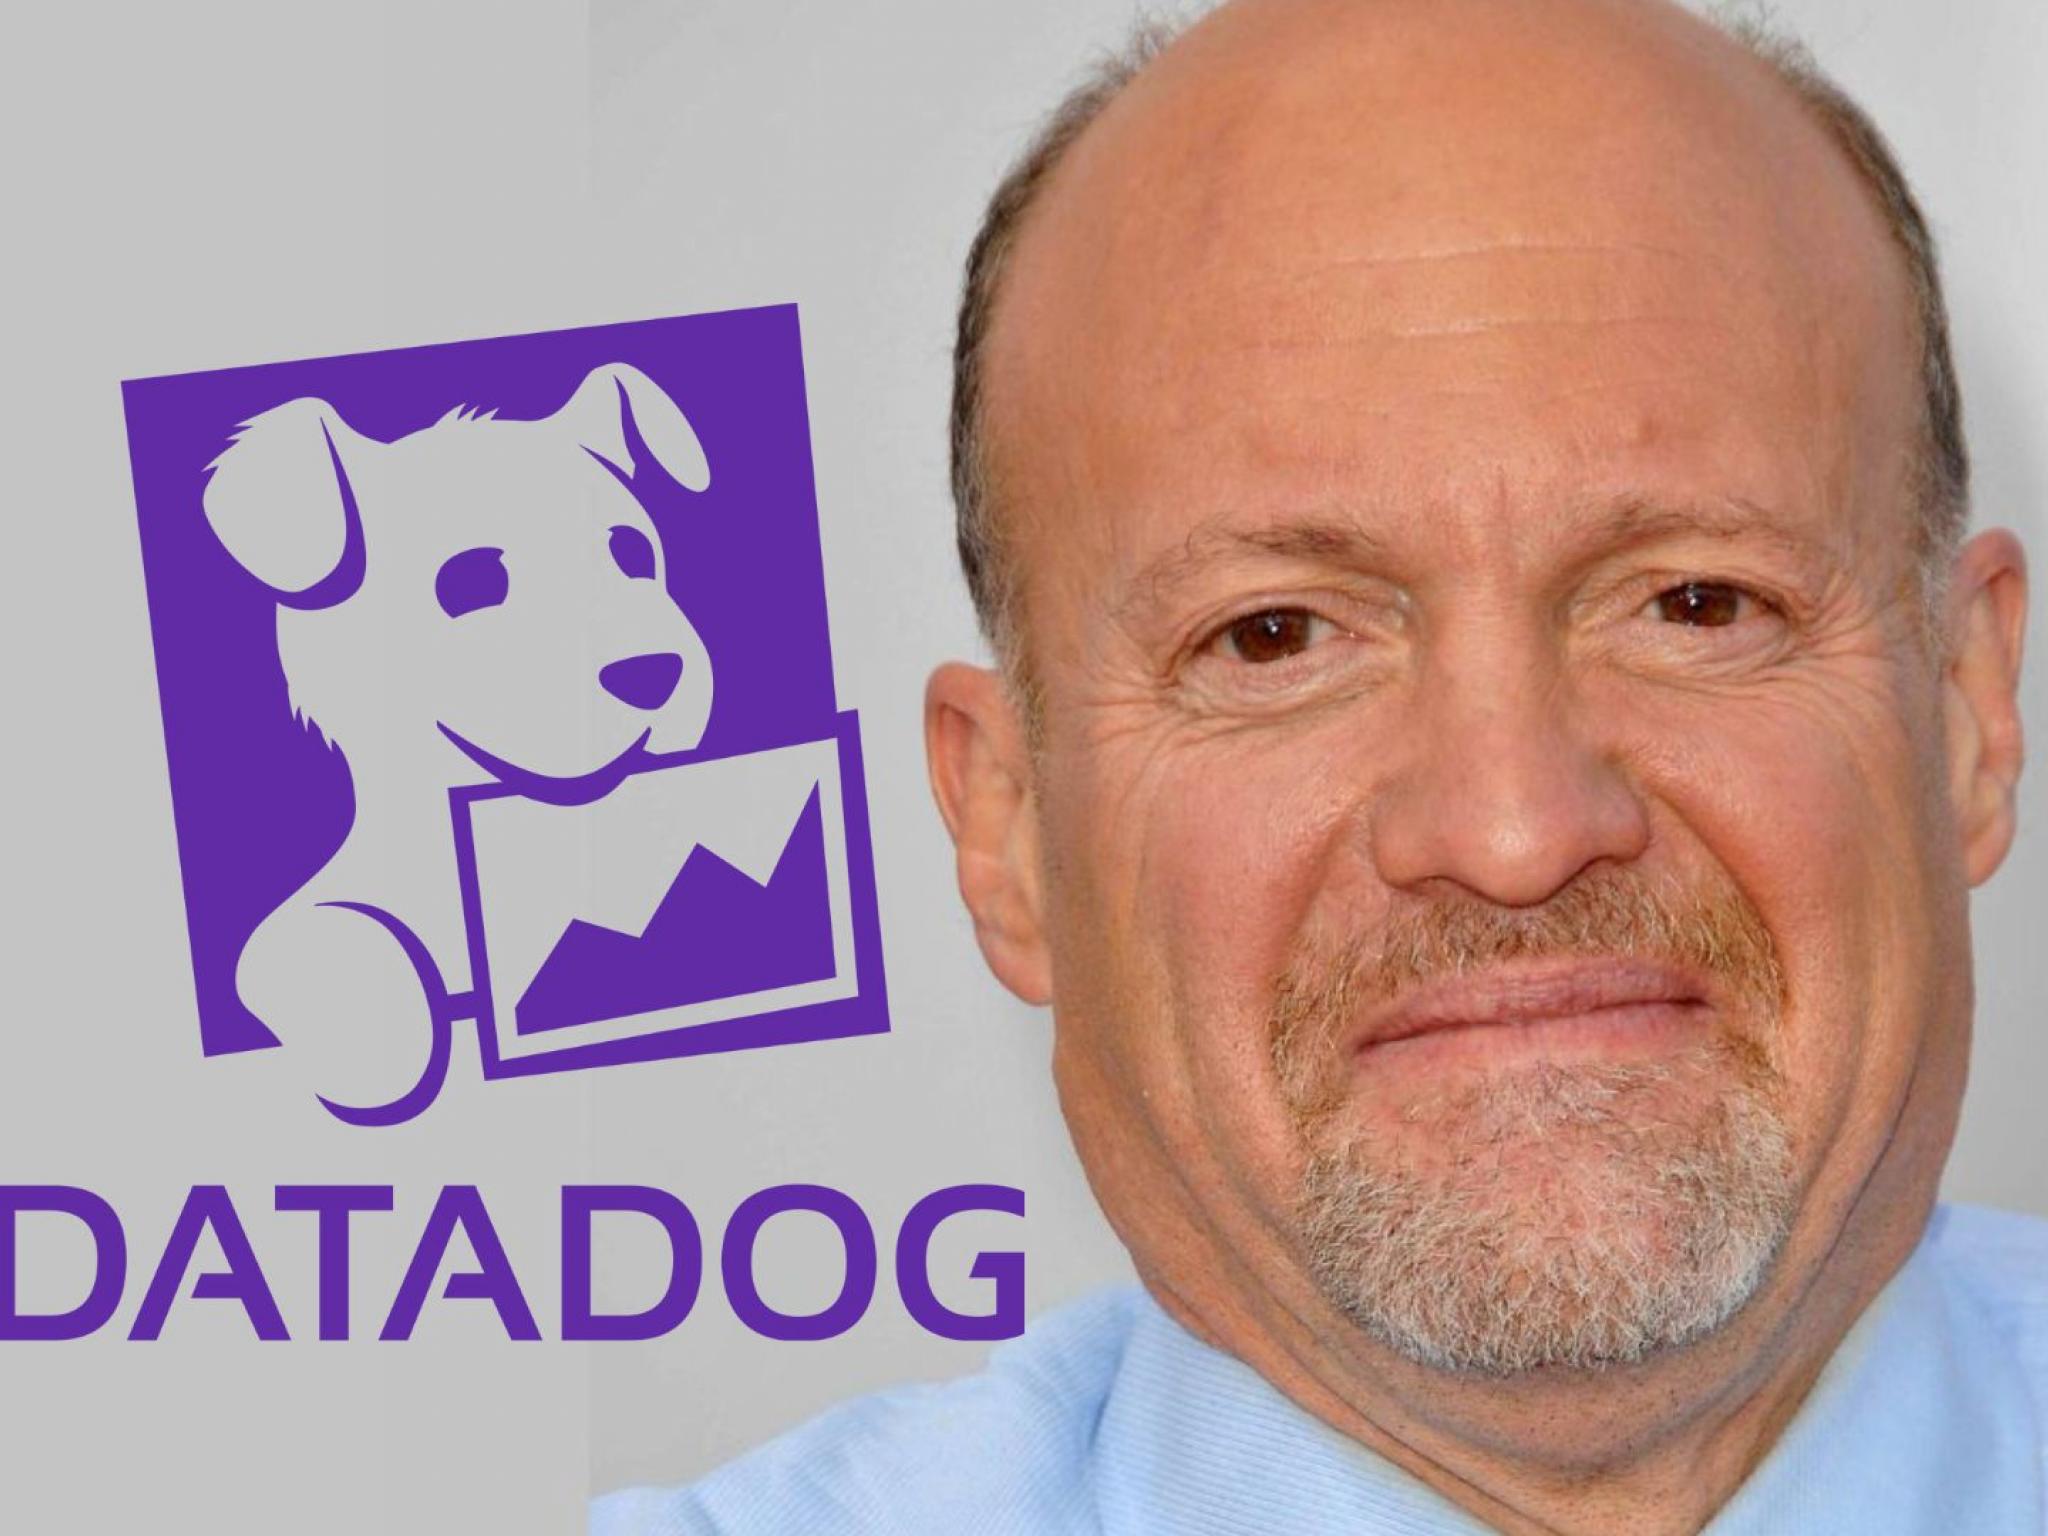  cramer-calls-datadog-dynamite-puts-sofi-in-dog-house-what-the-heck-is-going-on 